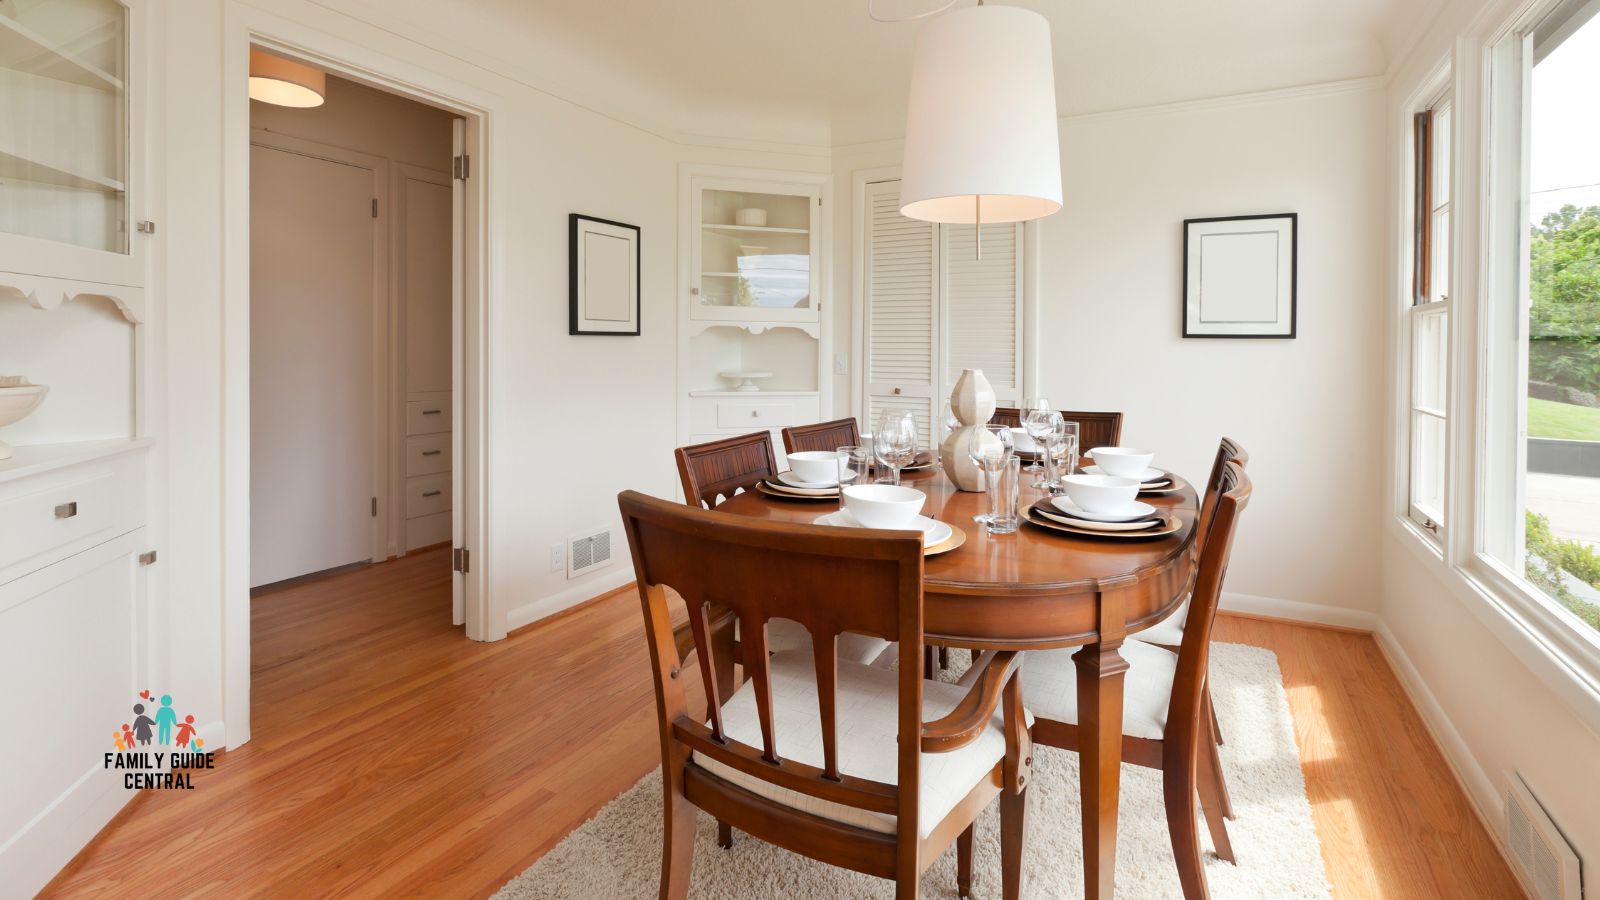 Small dining table in small home dining room - familyguidecentral.com